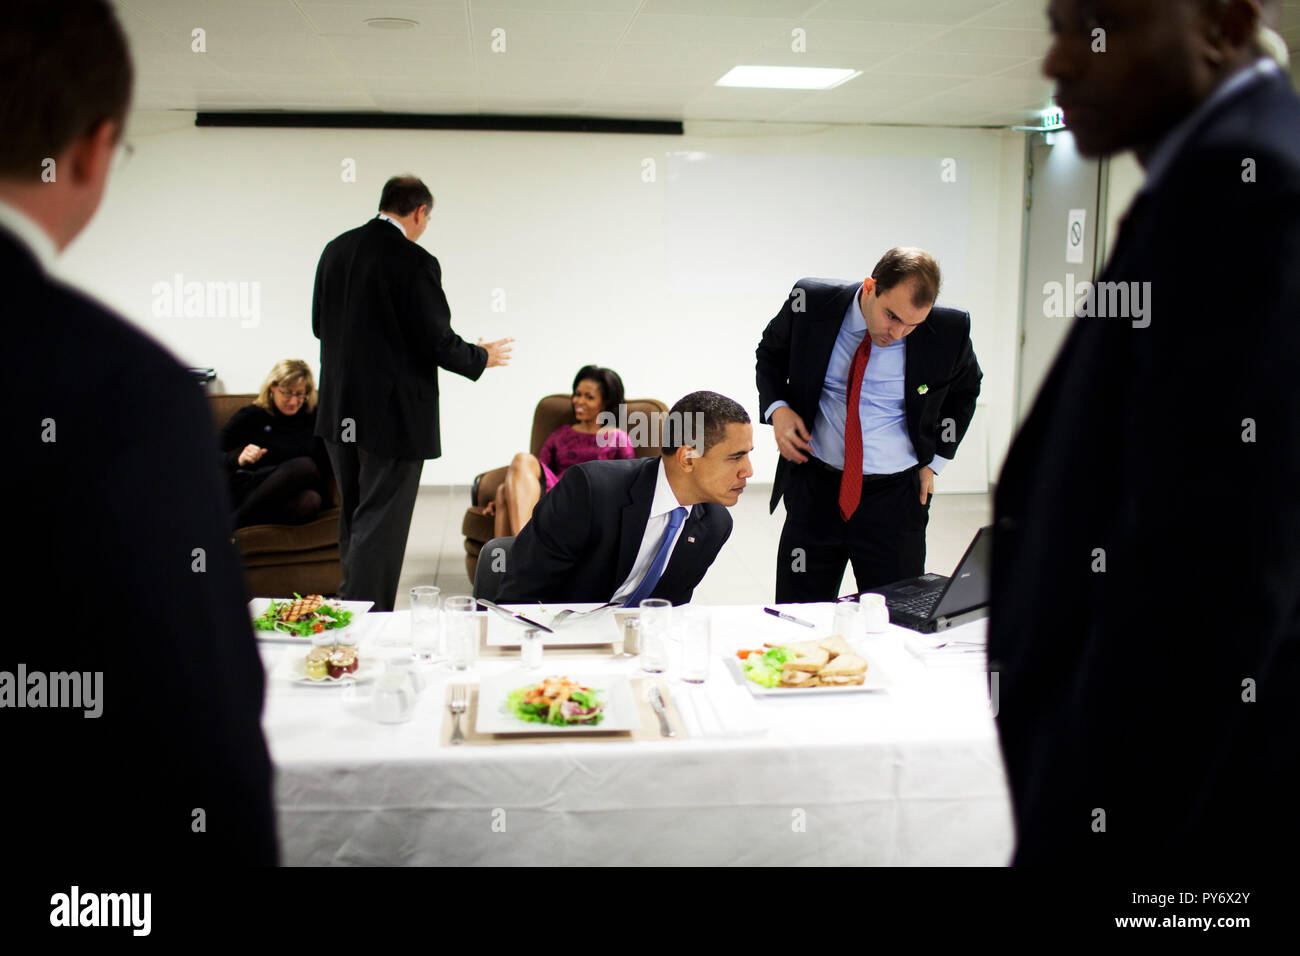 President Barack Obama reviews his speech to the Turkish parliament with speechwriter Ben Rhodes while eating lunch April 3, 2009, in Strasbourg, France. Official White House Photo/Pete Souza Stock Photo